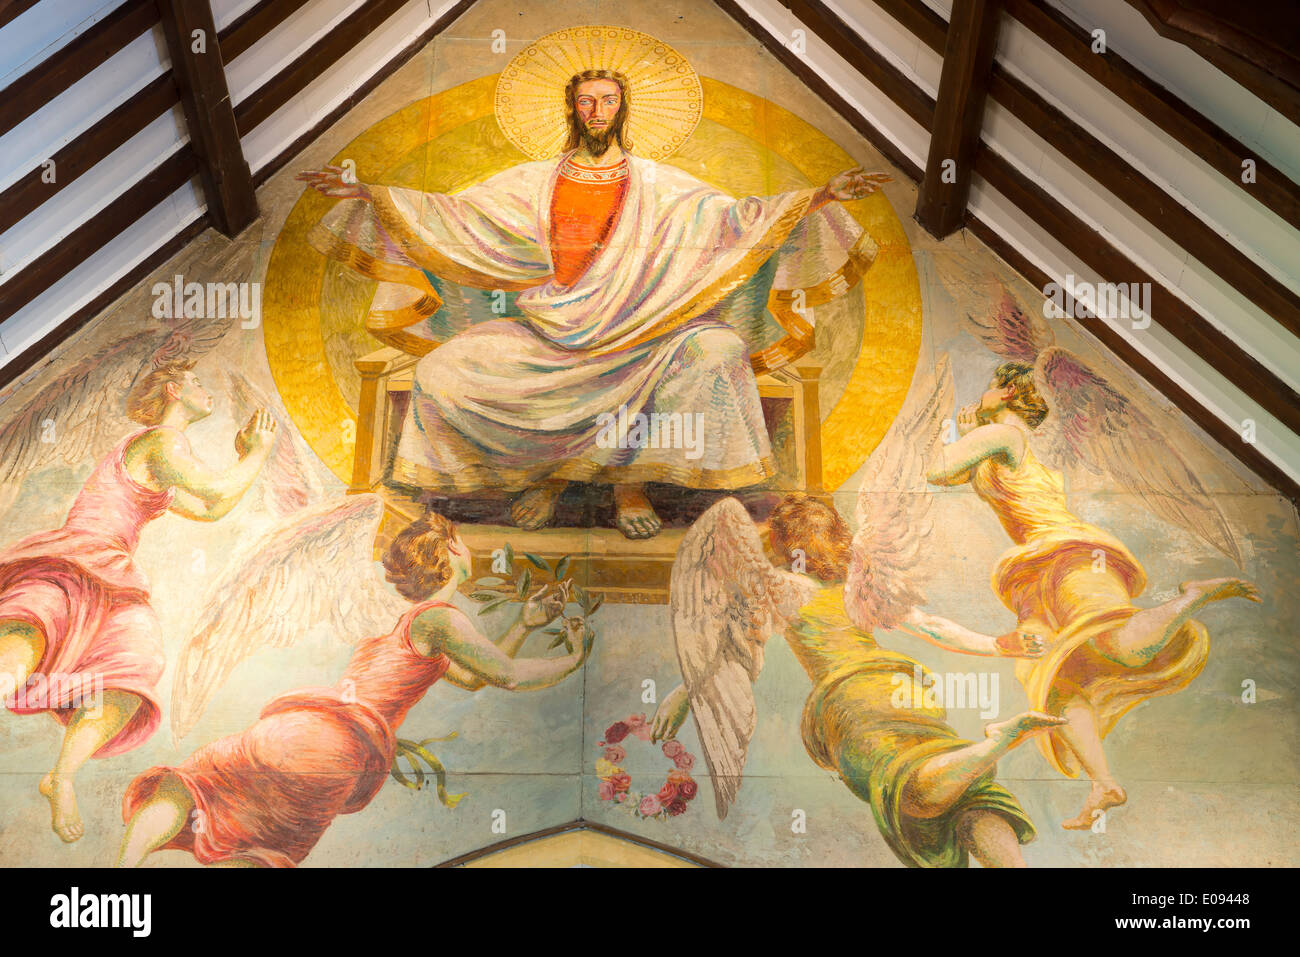 A mural representing Christ in Majesty By Duncan Grant c.1942. Church of St Michael and All Angels, Berwick, East Sussex, UK. Stock Photo